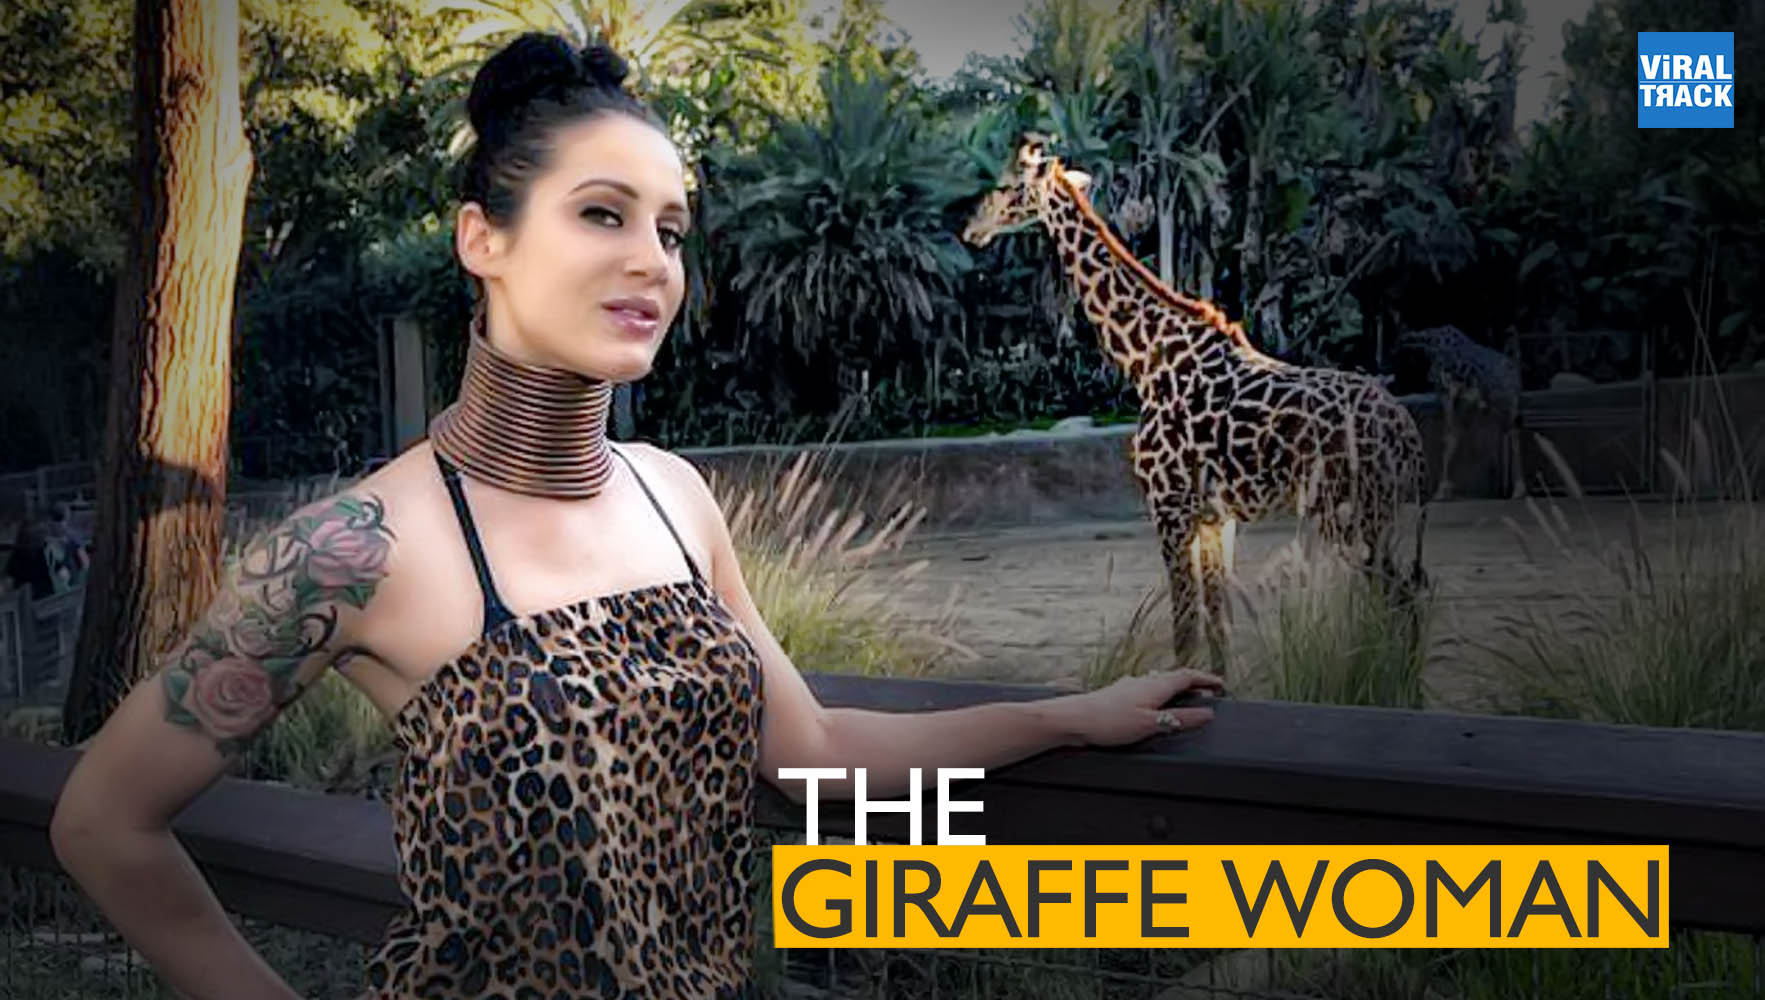 meet the giraffe woman who stretched her neck for 5 years